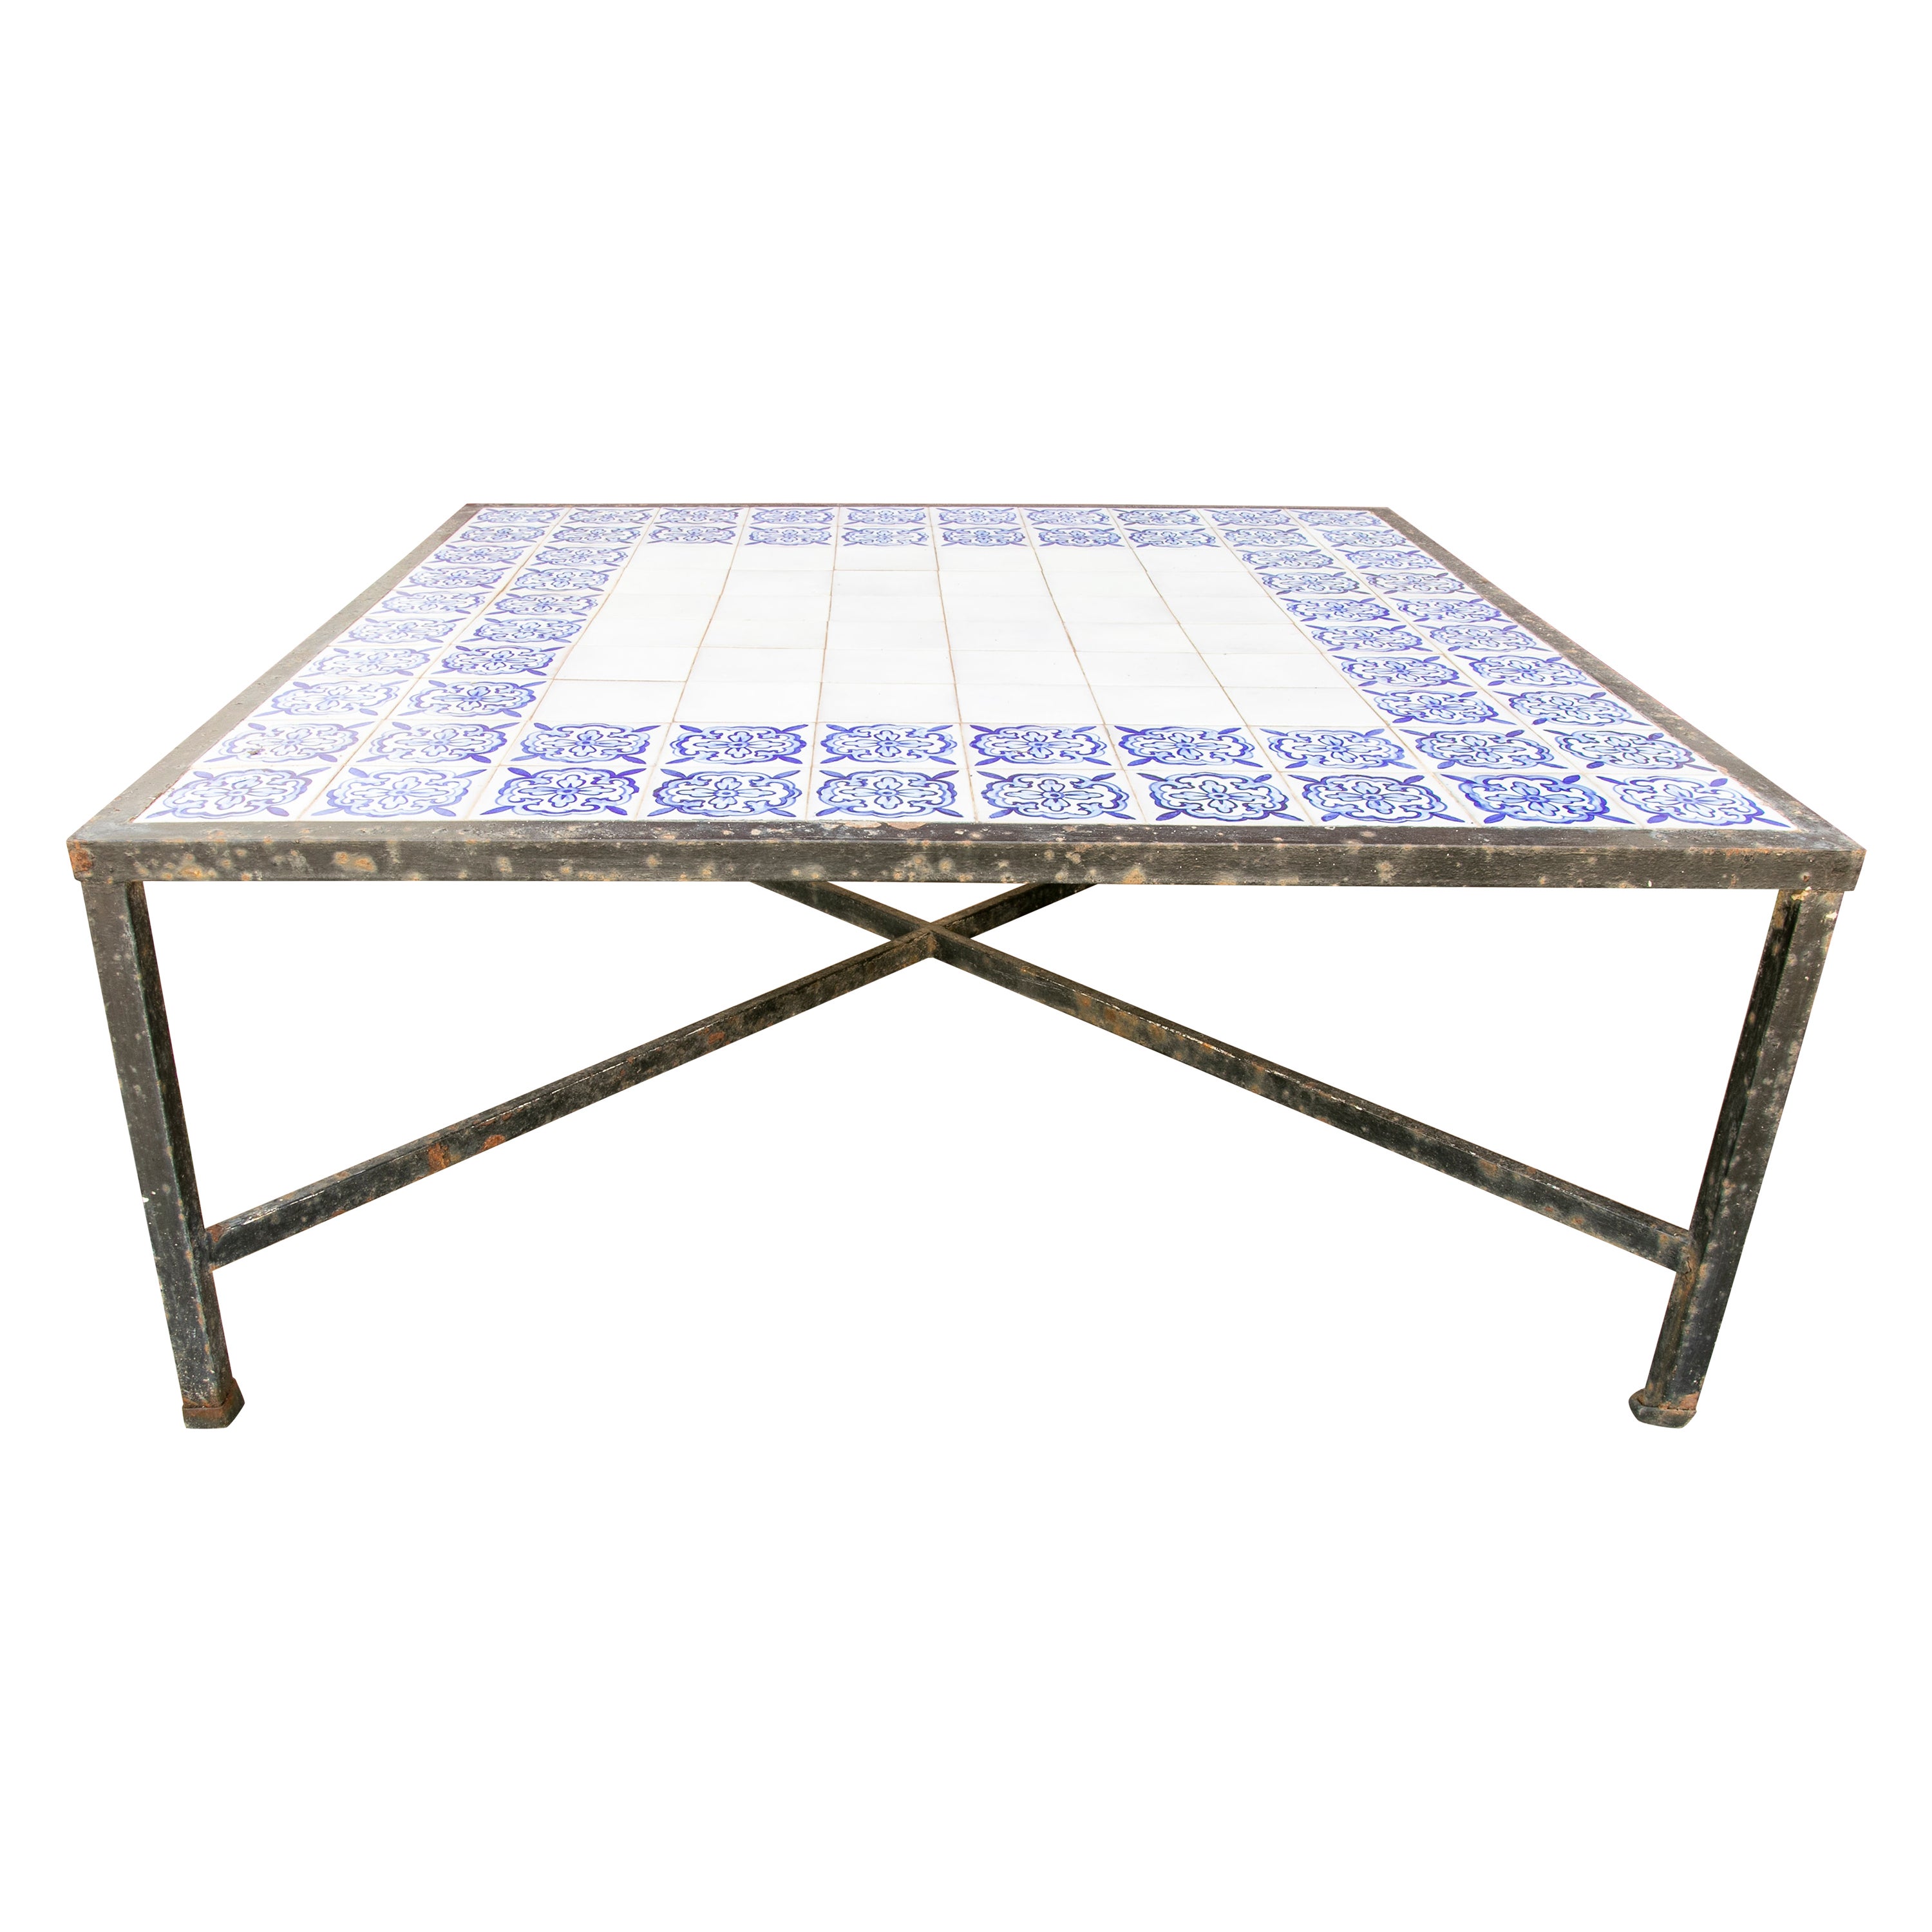 1980s Table with Iron Base and Geometrical Tiles on Top  For Sale